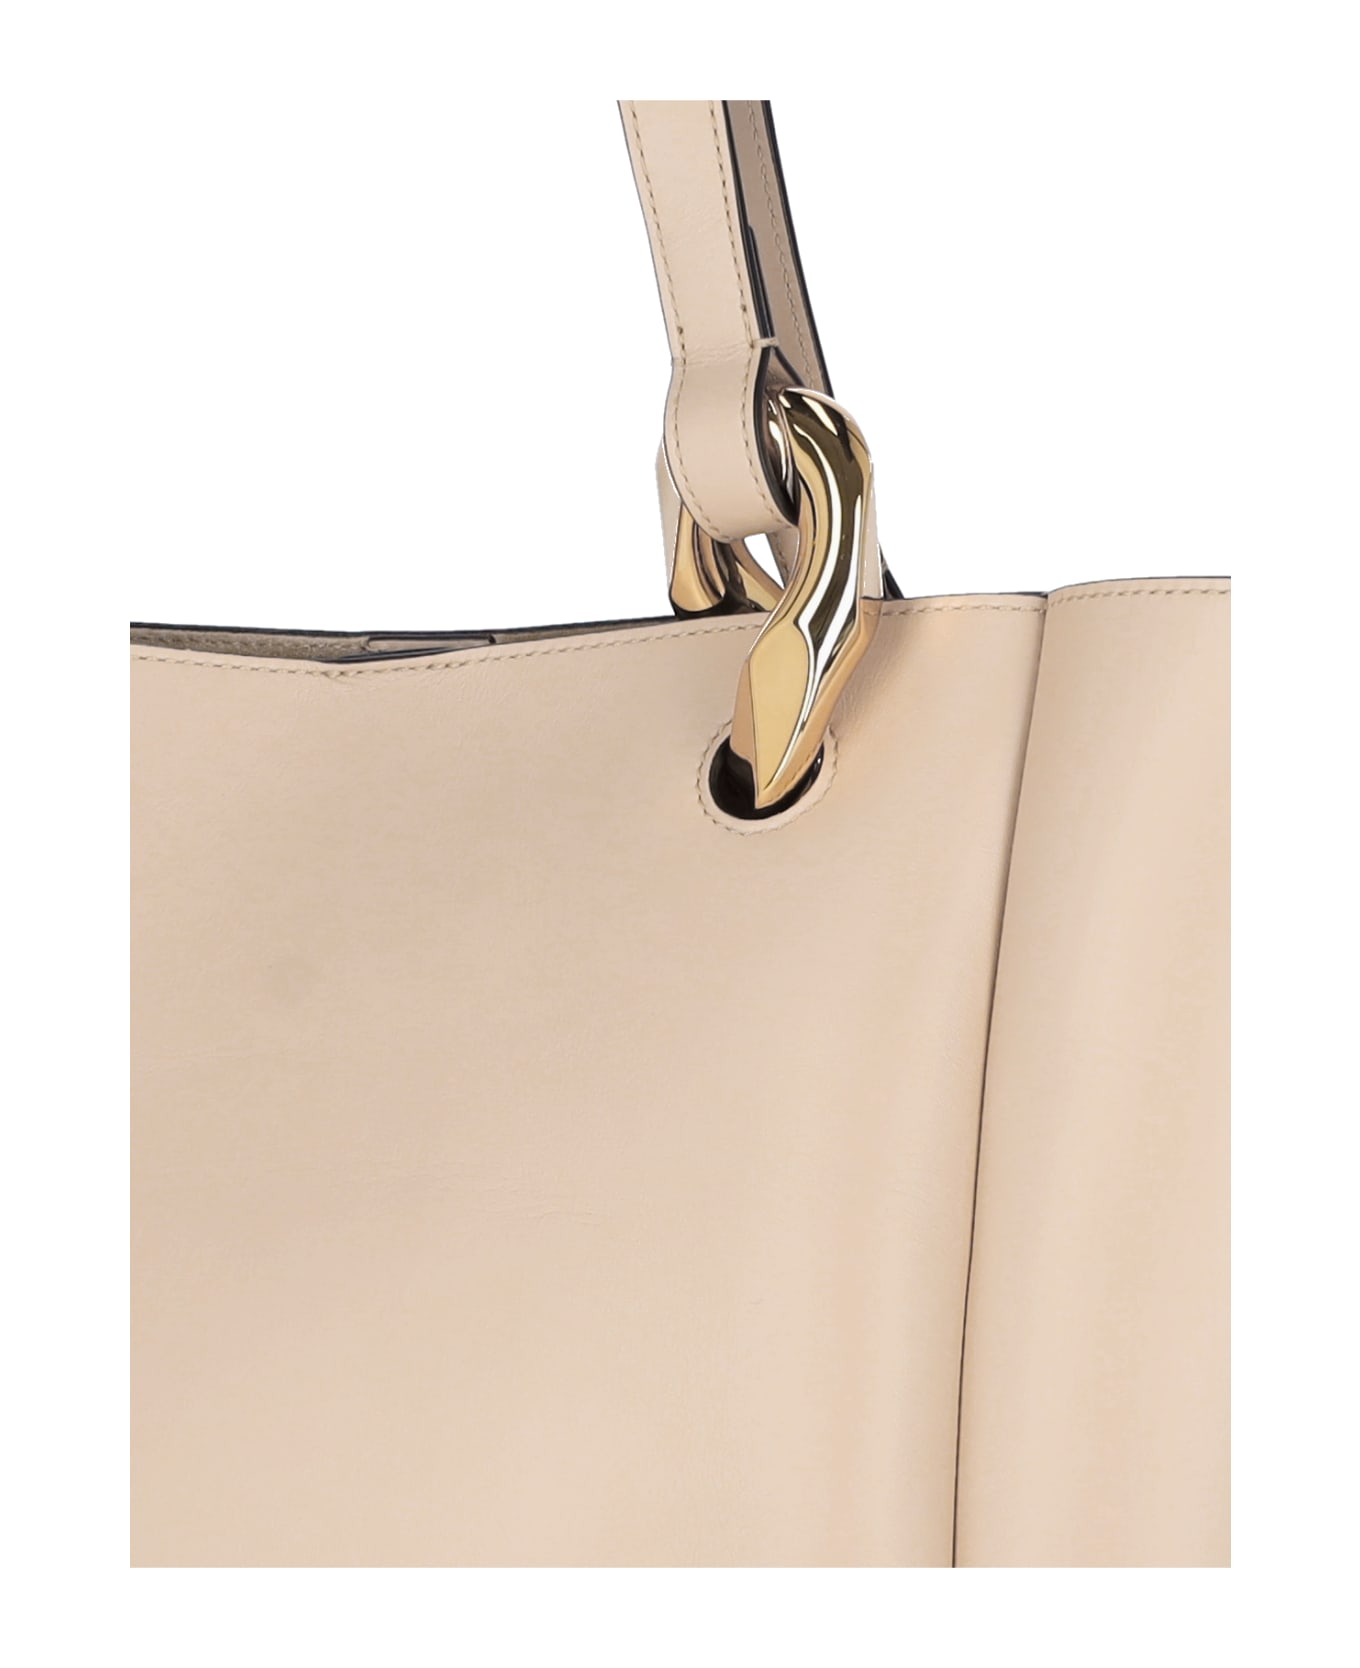 J.W. Anderson "chain Cabas" Tote Bag - Beige